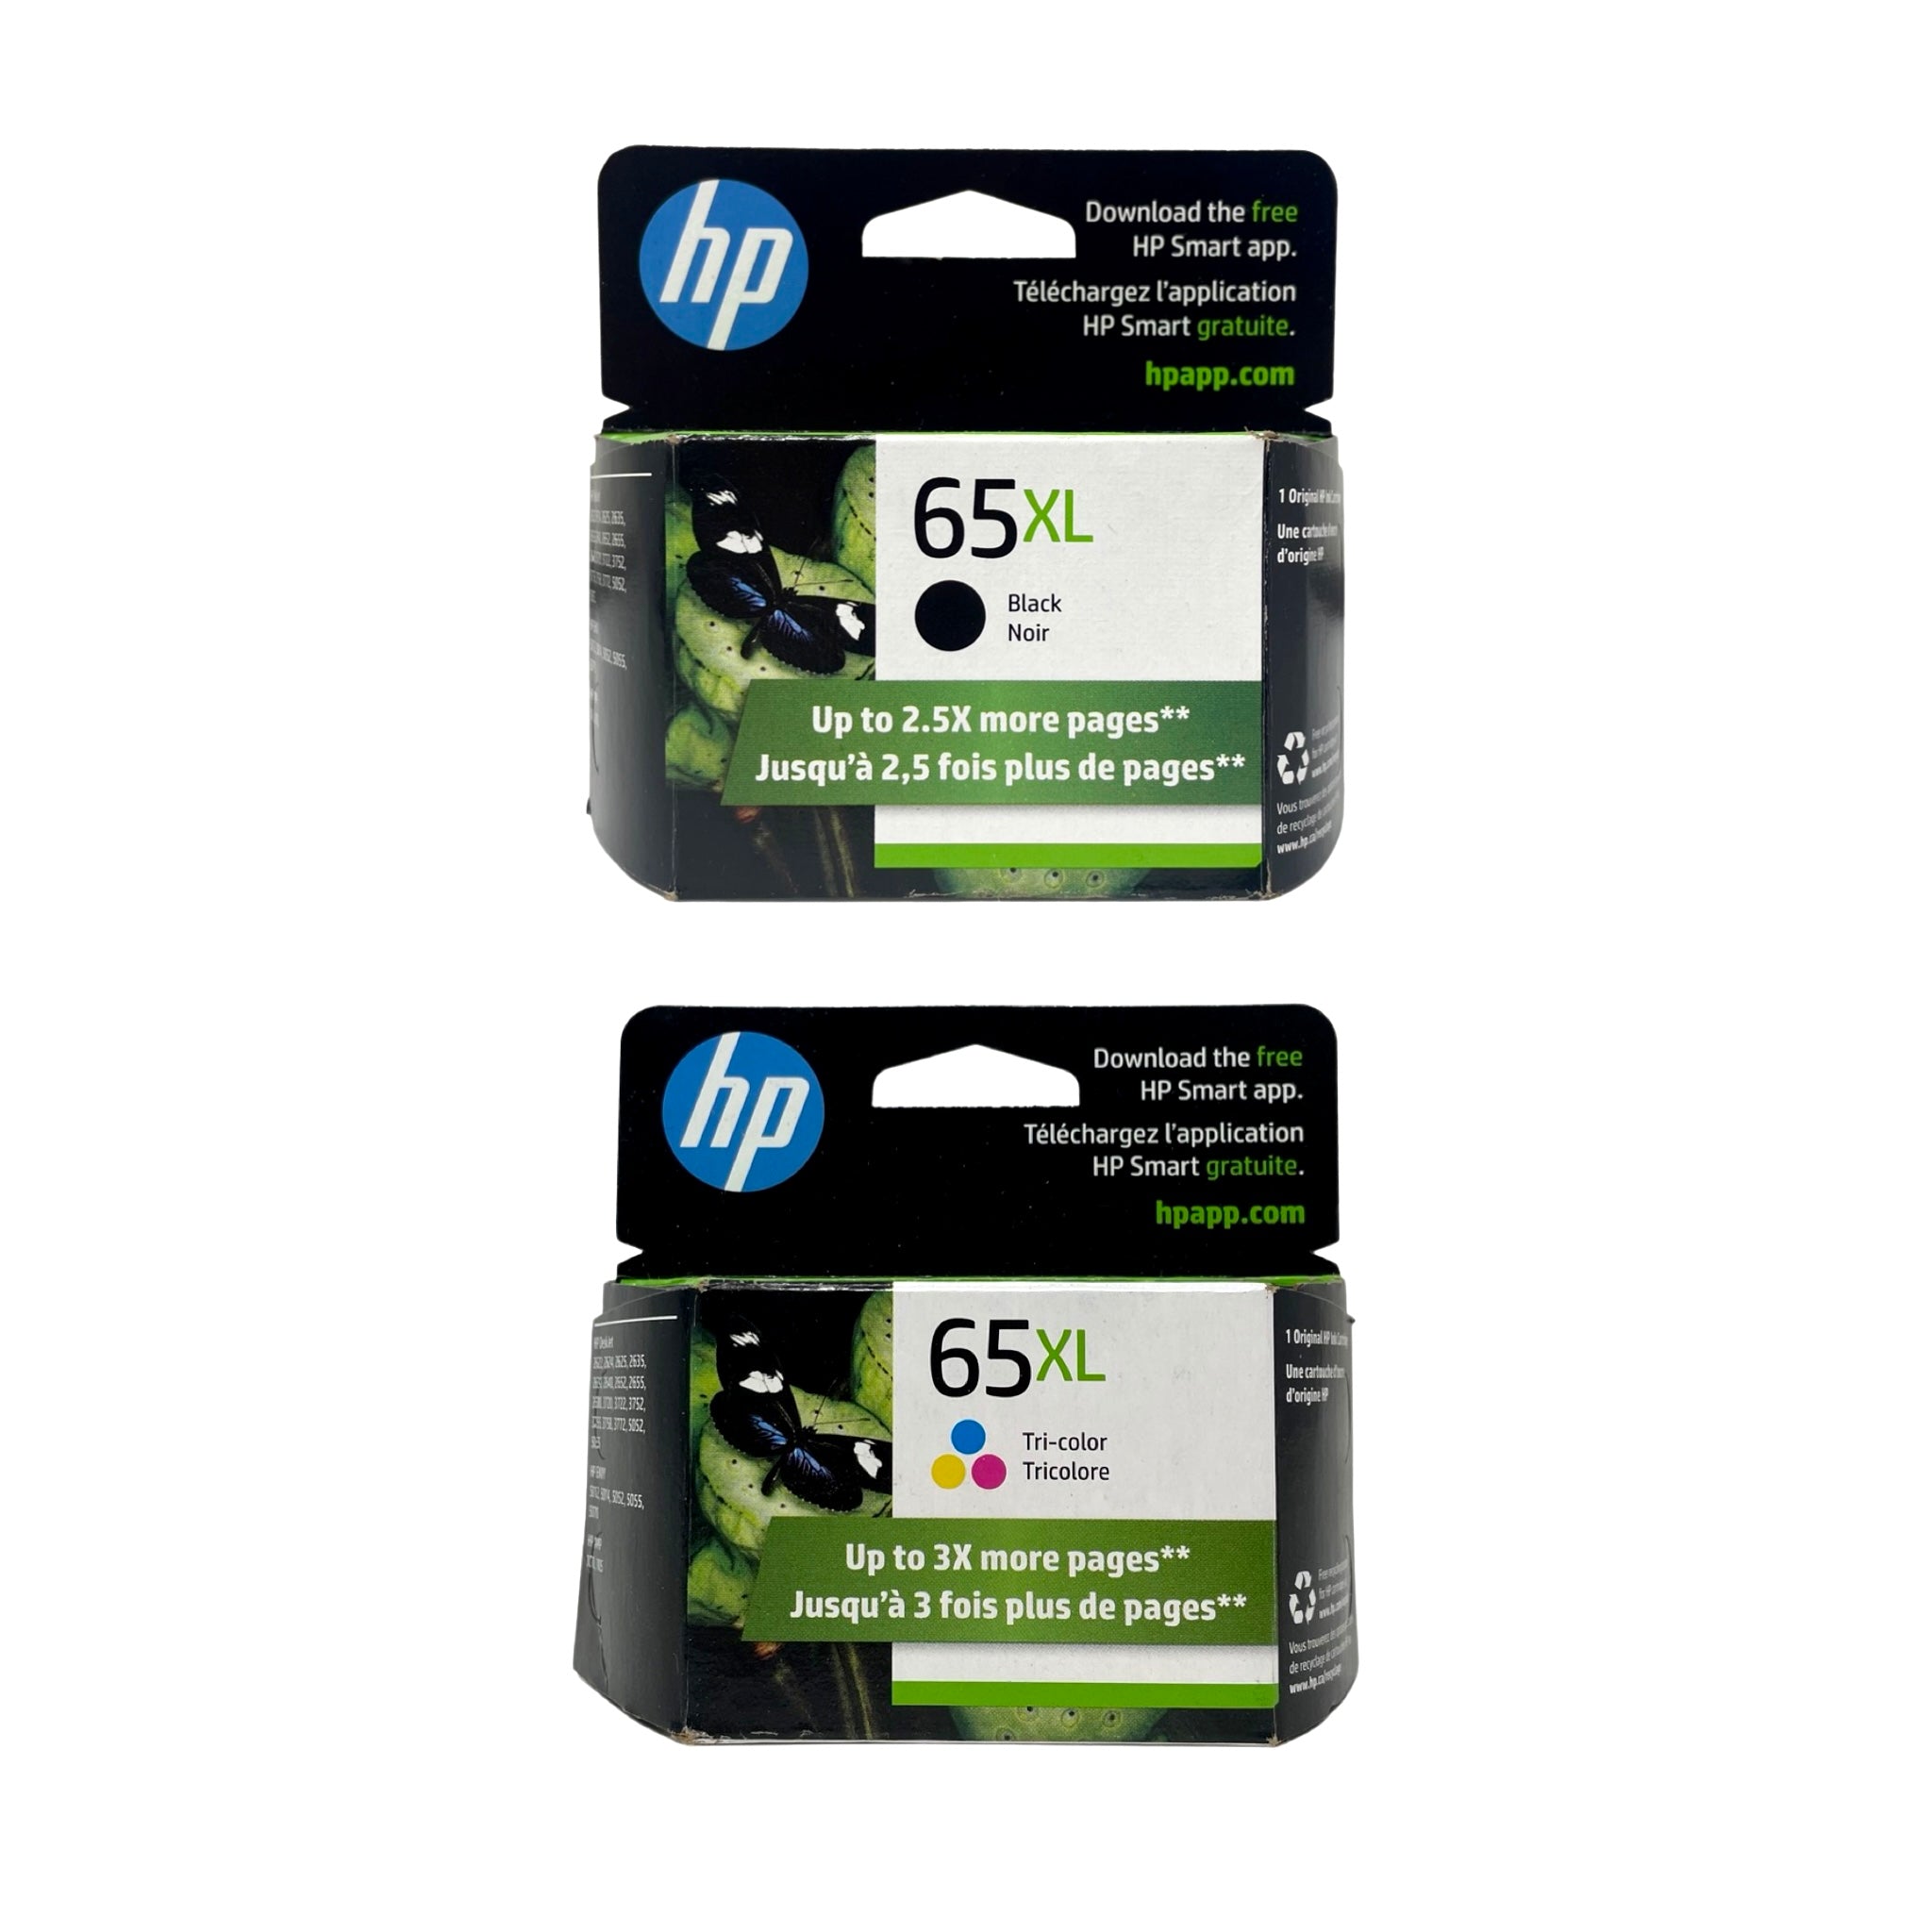 HP 65XL Ink 2 pack – Black and Color - Original HP Ink Cartridges - High Yield (T0A37BN)